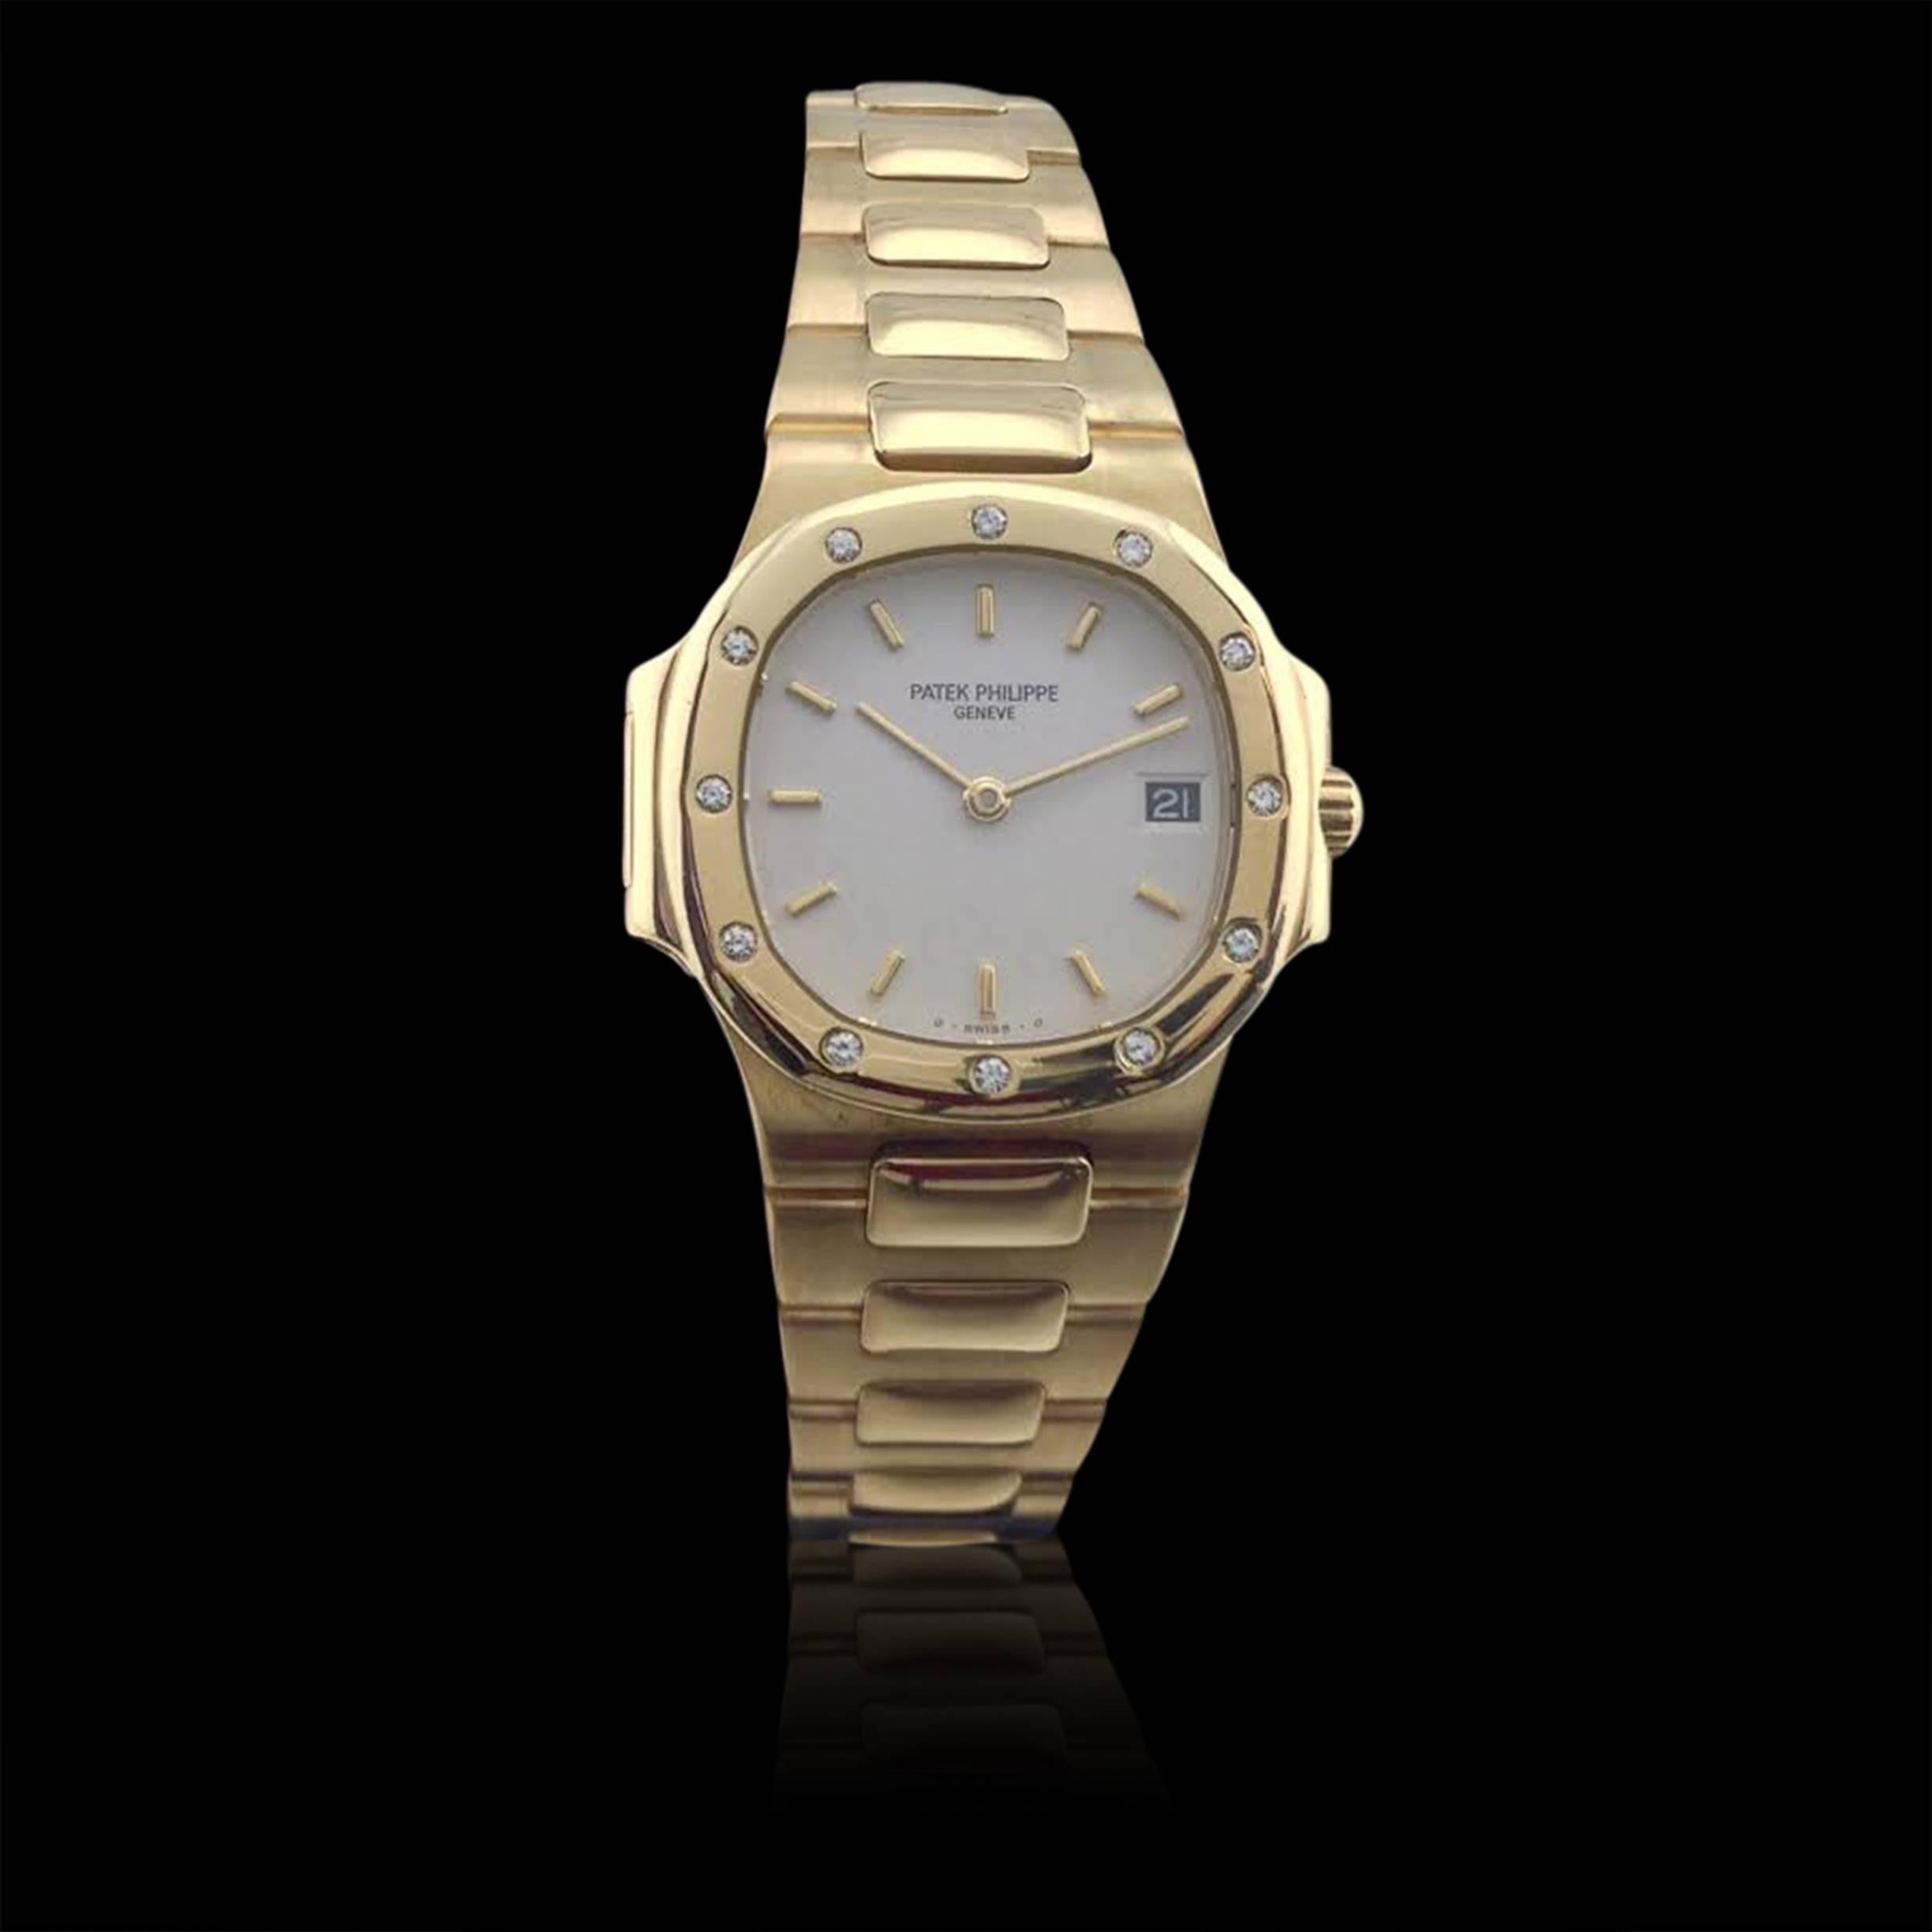 From Patek Philippe, one of the first names in luxury timepieces, comes the ladies 18k yellow gold Nautilus watch with diamond-set bezel. Featuring a white dial, bar chapters and date, this 27mm beauty is a timeless classic. The watch fits a 8 1/4